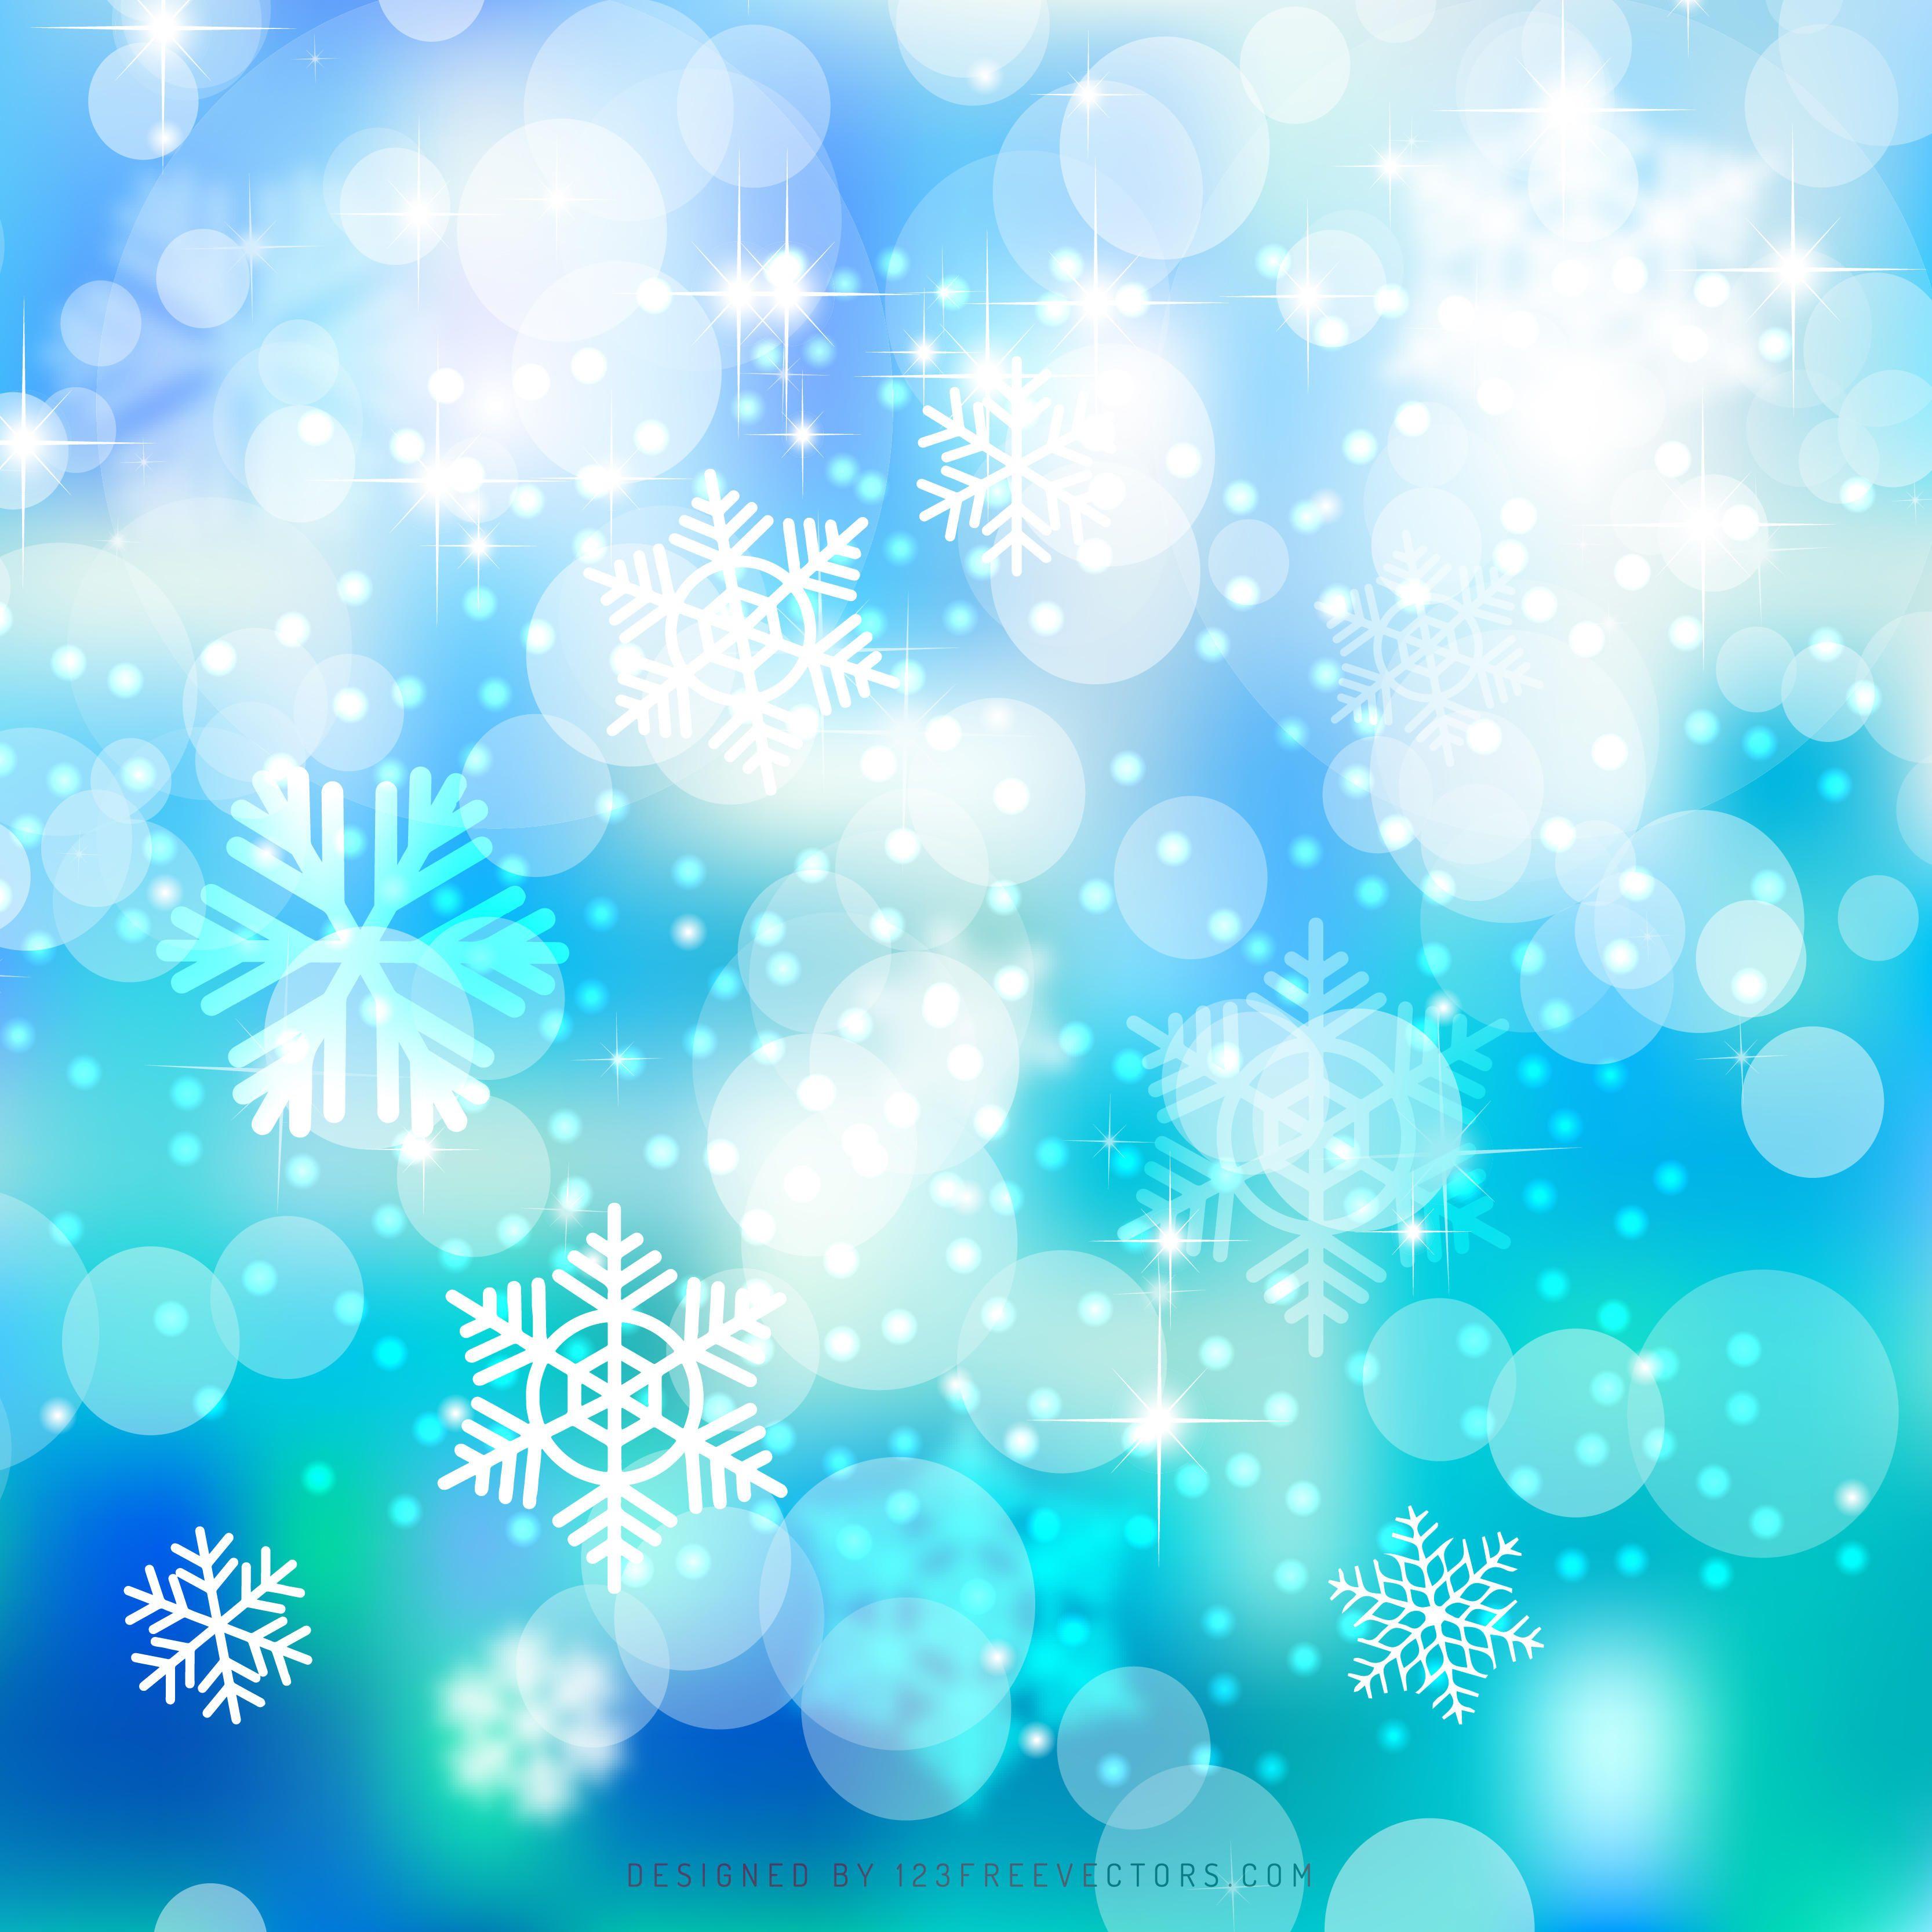 Turquoise Christmas Wallpapers - Top Free Turquoise Christmas ...